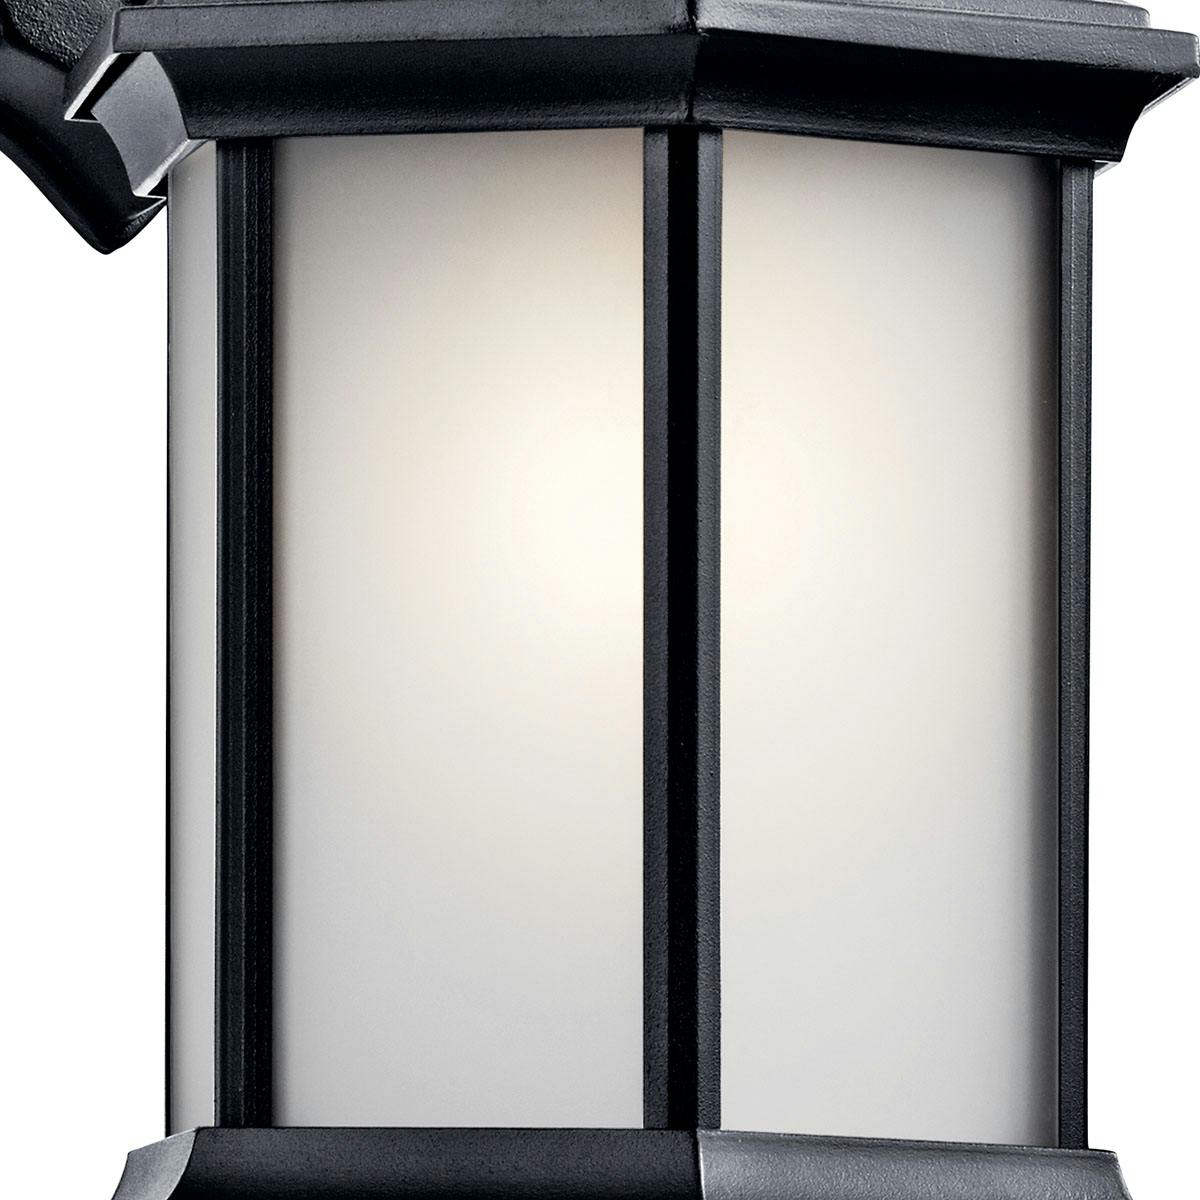 Close up view of the Chesapeake 11.75" Wall Light Glass Black on a white background